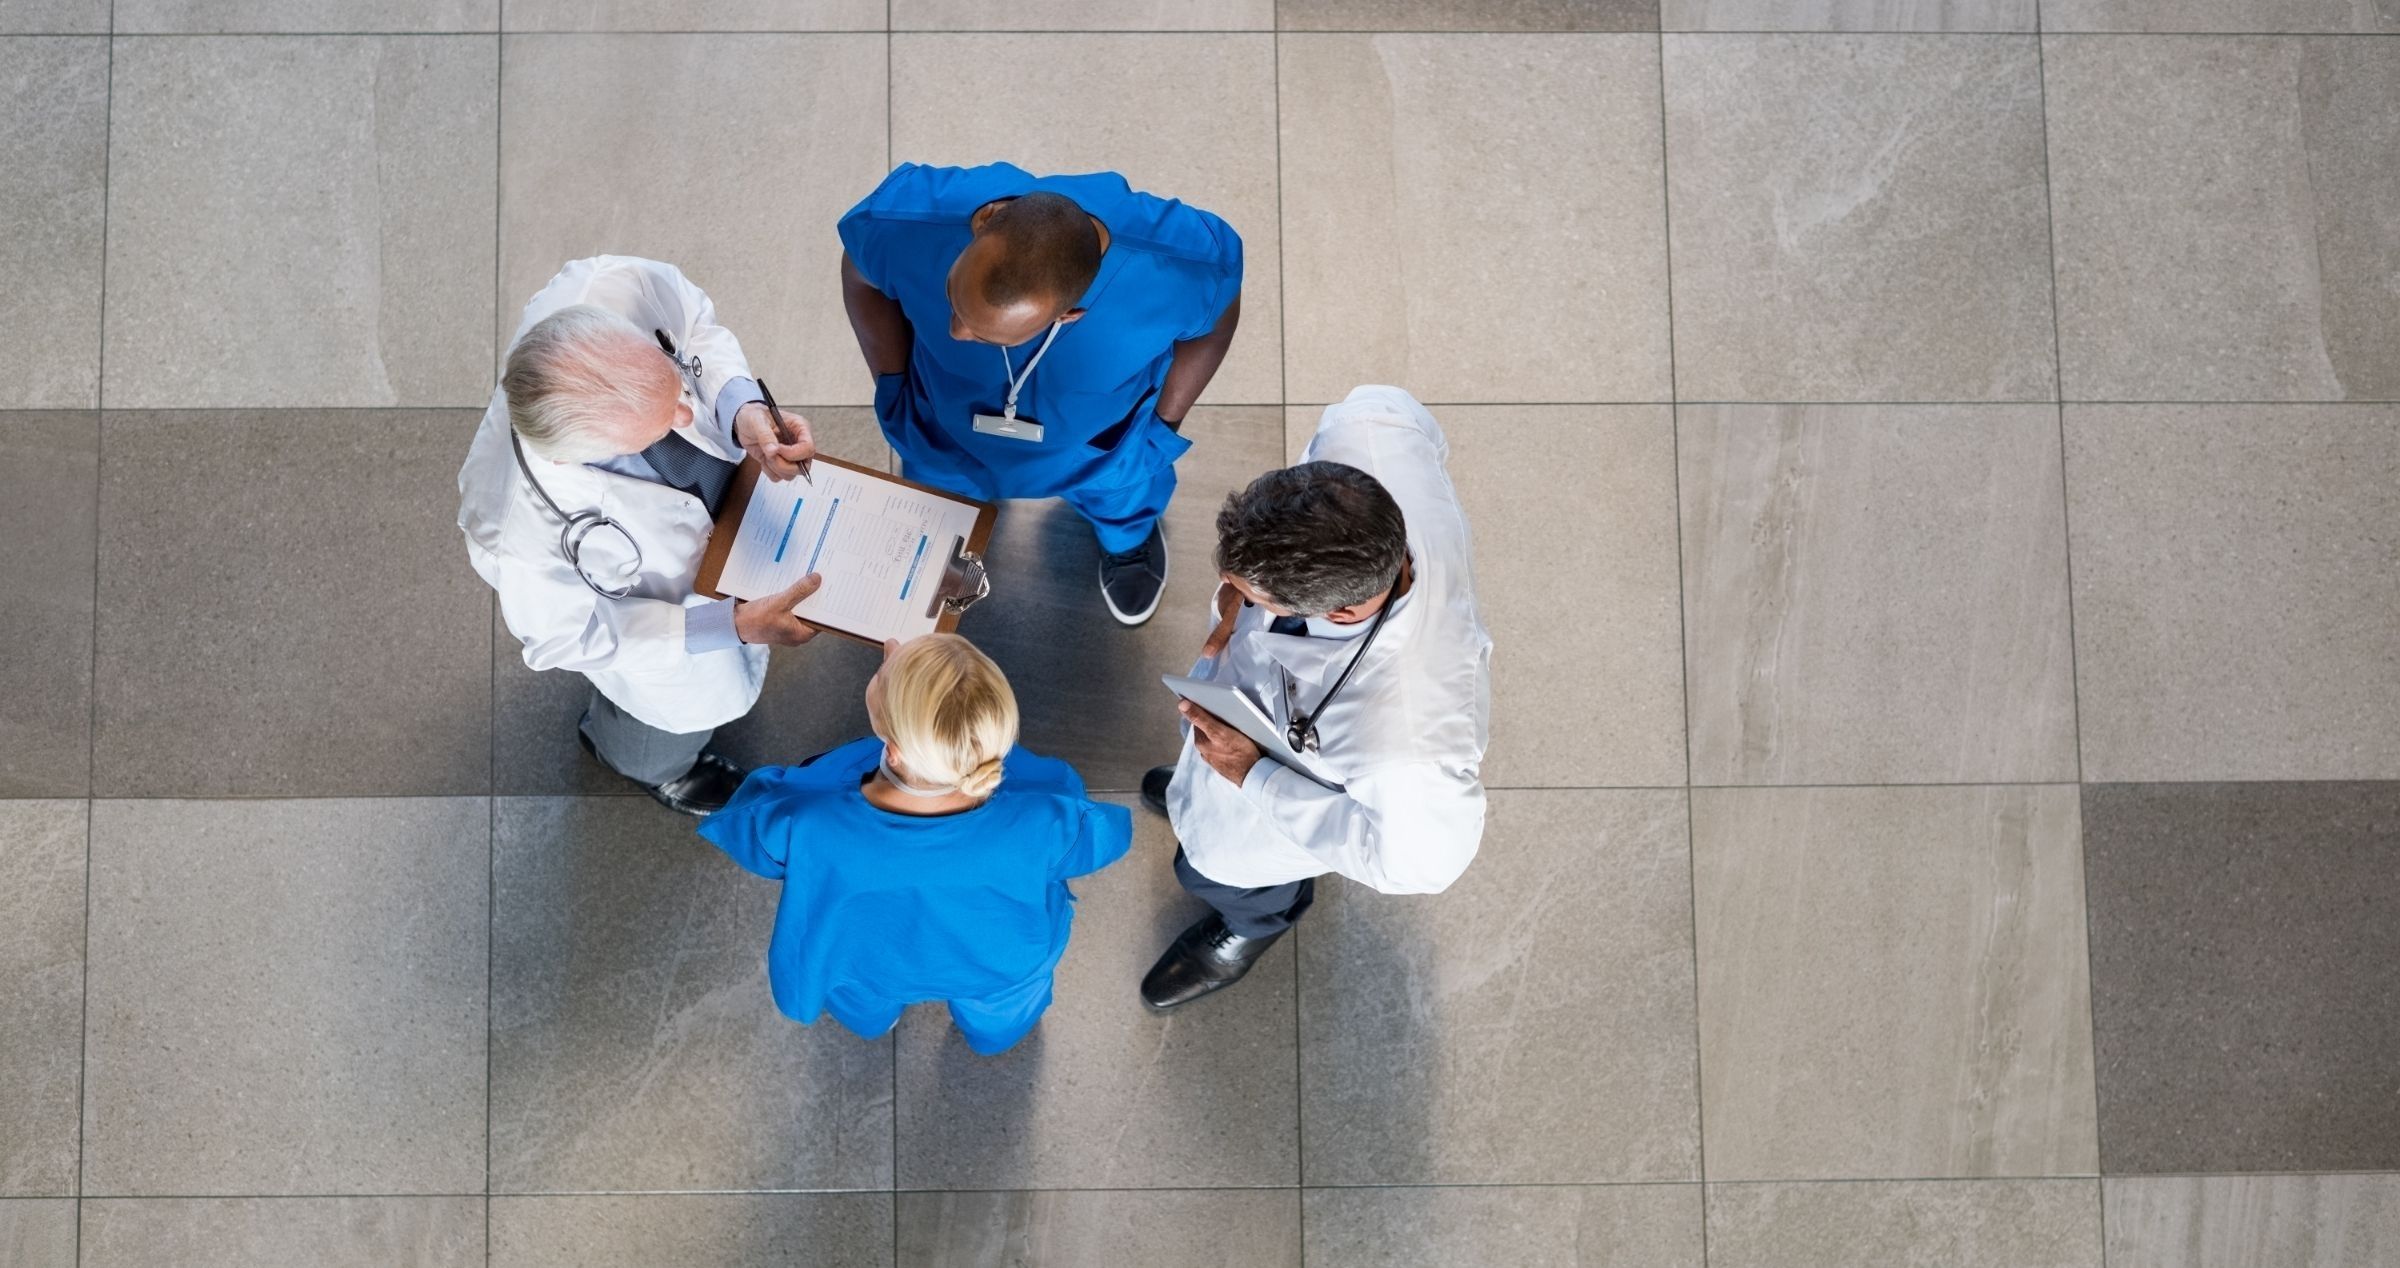 Overhead shot of group of doctors meeting in hallway having a discussion